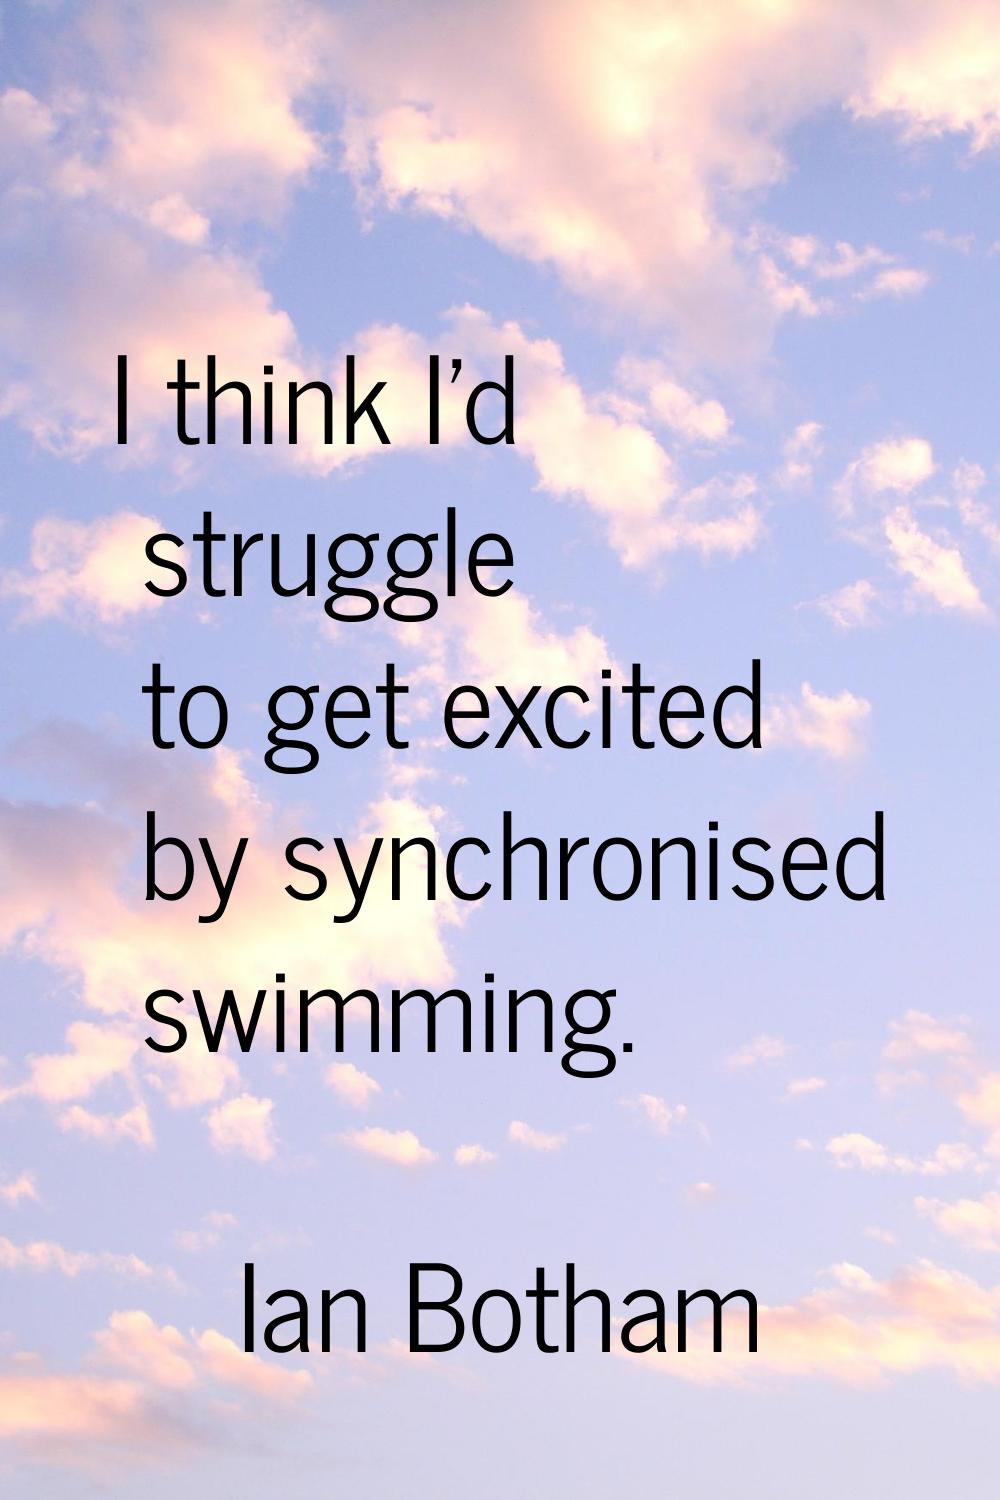 I think I'd struggle to get excited by synchronised swimming.